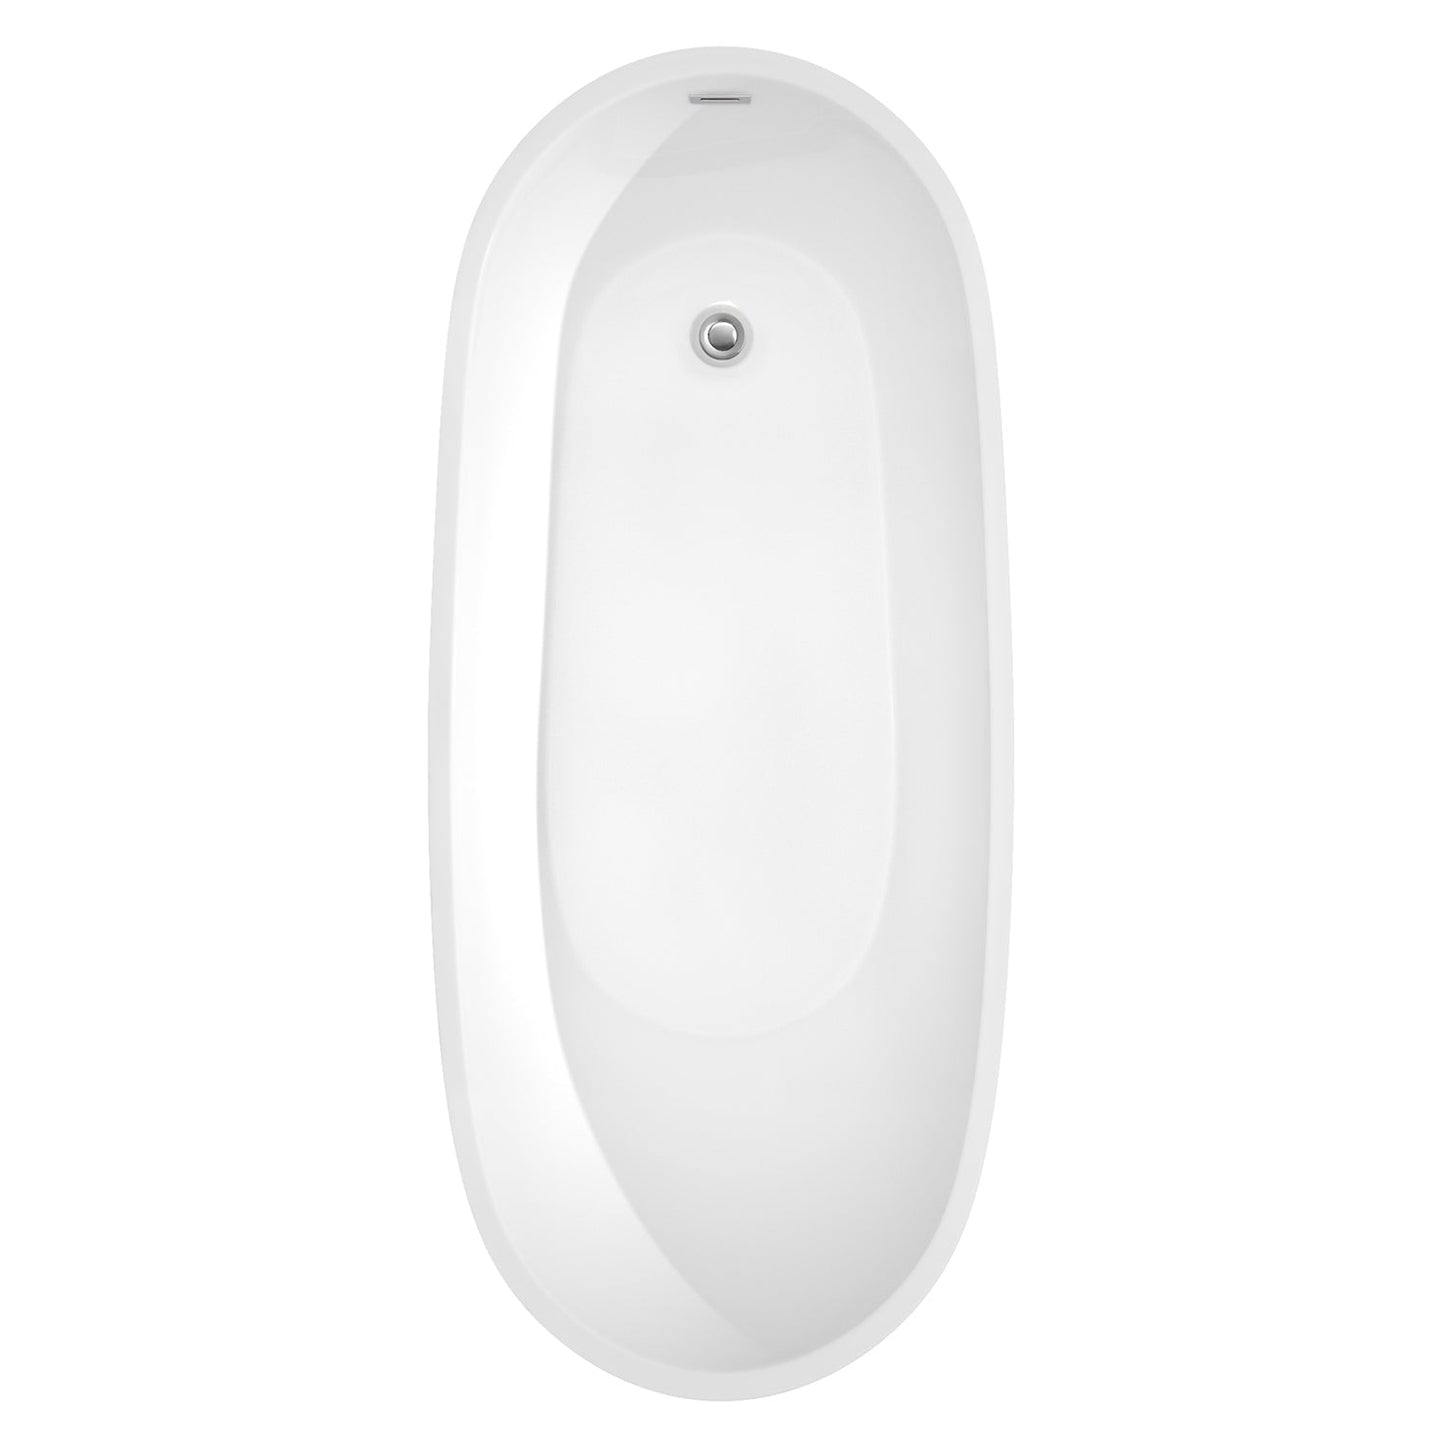 Wyndham Collection Florence 68" Freestanding Bathtub in White With Polished Chrome Drain and Overflow Trim